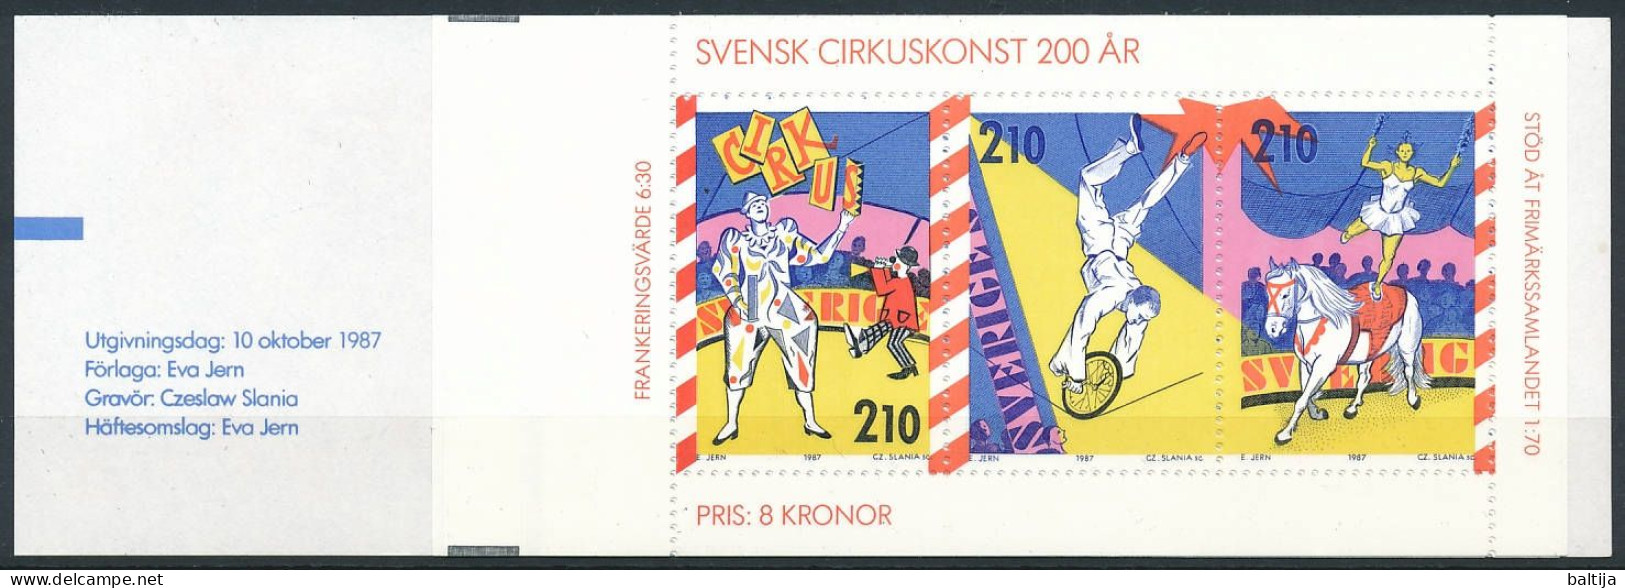 H.379 Booklet ** MNH / Circus In Sweden 200 Years Anniversary, Clowns, Tightrope Artist, Horse Dressage - Circo